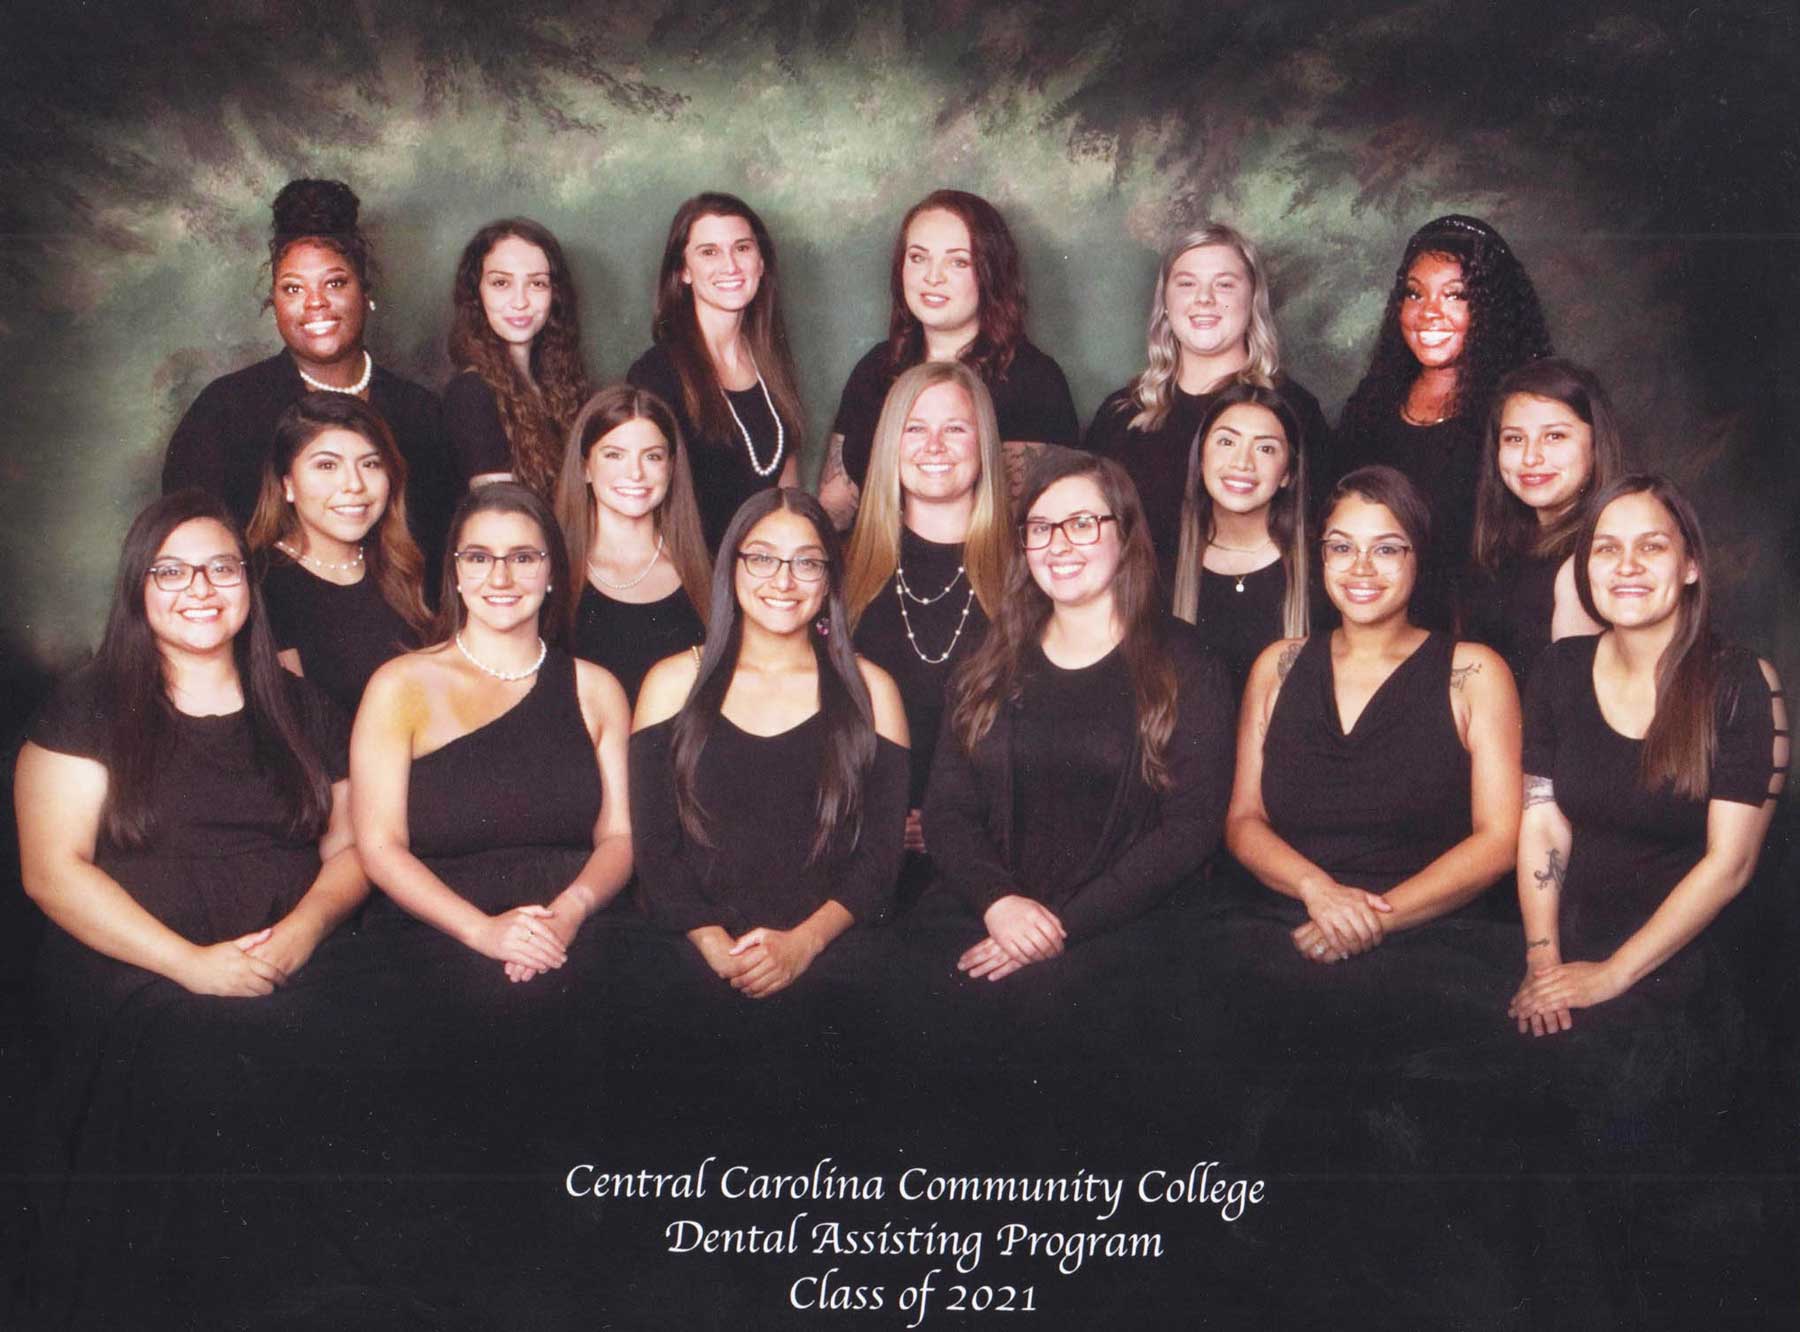 Click to enlarge,  The Central Carolina Community College Dental Assisting Class of 2021 held its pinning ceremony on Wednesday, July 21. Class members - with home counties listed -- are pictured, left to right: first row, Yoana Aguirre-Morales (Chatham), Christine White (Lee), Jasmine Garcia (Richmond), Lauren Ammons (Harnett), Addonus Frazier (Lee), and Tiffany Talbert (Moore); second row, Cynthia Ocampo (Lee), Anna Westbrook (Harnett), Chasity Perez (Harnett), Zaidaly Santiago (Chatham), and Yesenia Alvarado-Gutierrez (Lee); third row, Daijah Allen (Cumberland), Eden Pruitt-Harris (Lee), Kristin Vause (Lee), Michala Szubinski (Moore), Haley Godfrey (Lee), and Brianna Bennett (Harnett); not pictured, Jasmine Marcano (Hoke). The CCCC Dental Assisting program is ranked as the No. 2 Best Dental Assistant School in North Carolina - 2021 by NursingProcess.org. For more information on the CCCC Dental Assisting program, visit www.cccc.edu/curriculum/majors/dental/assisting/. 